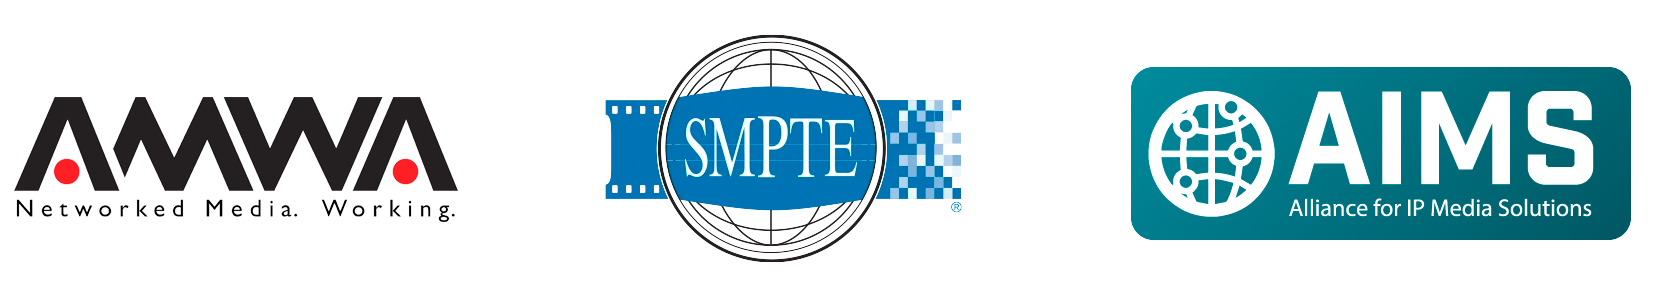 [Translate to Deutsch:] AMWA SMPTE AIMS